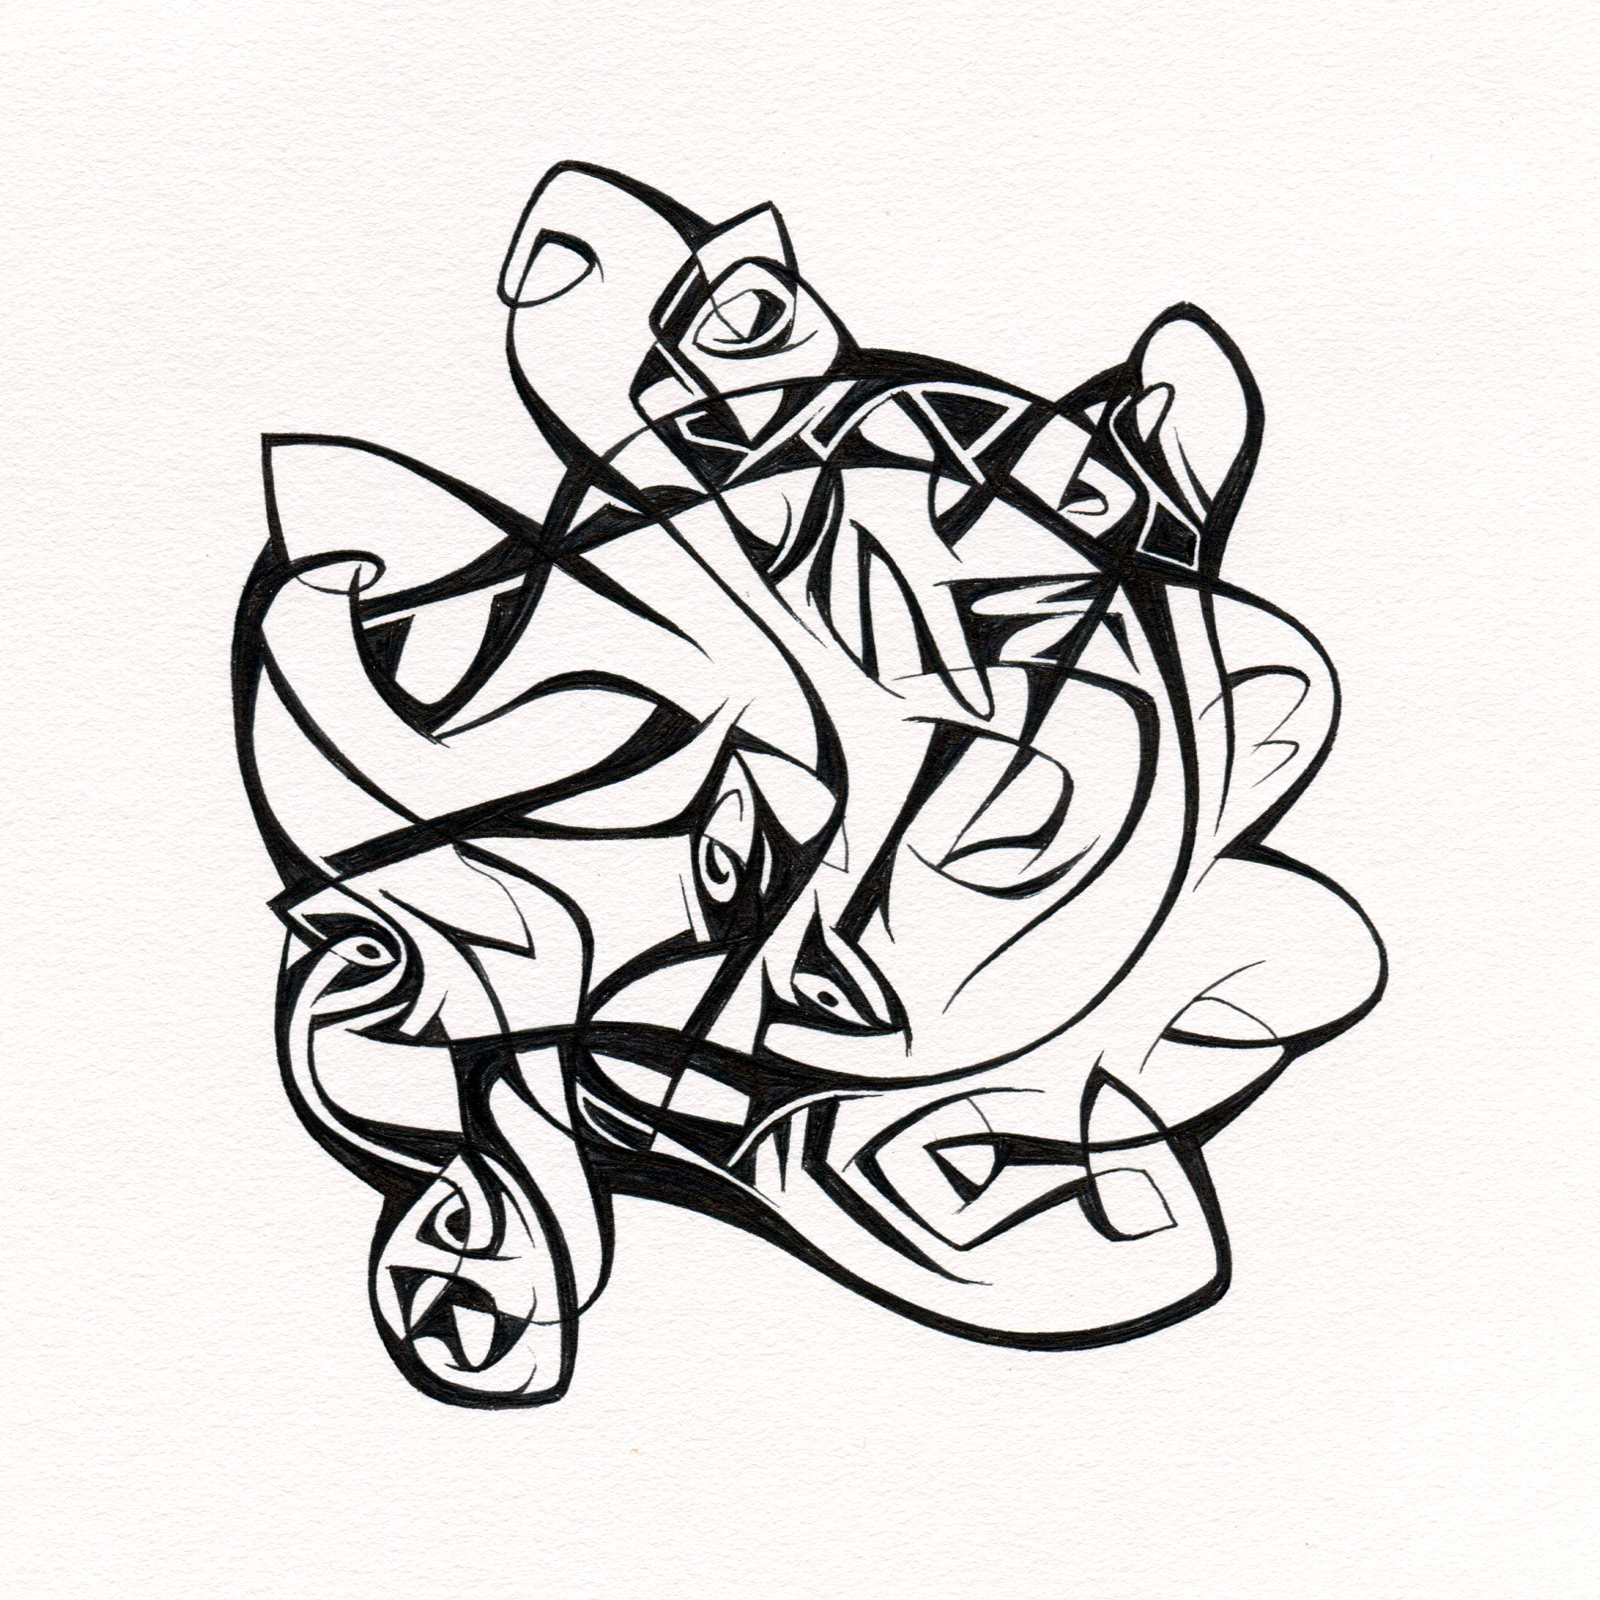   Untitled Ink Drawing #99 , 2015. Ink on paper. Approximately 5" x 5". 